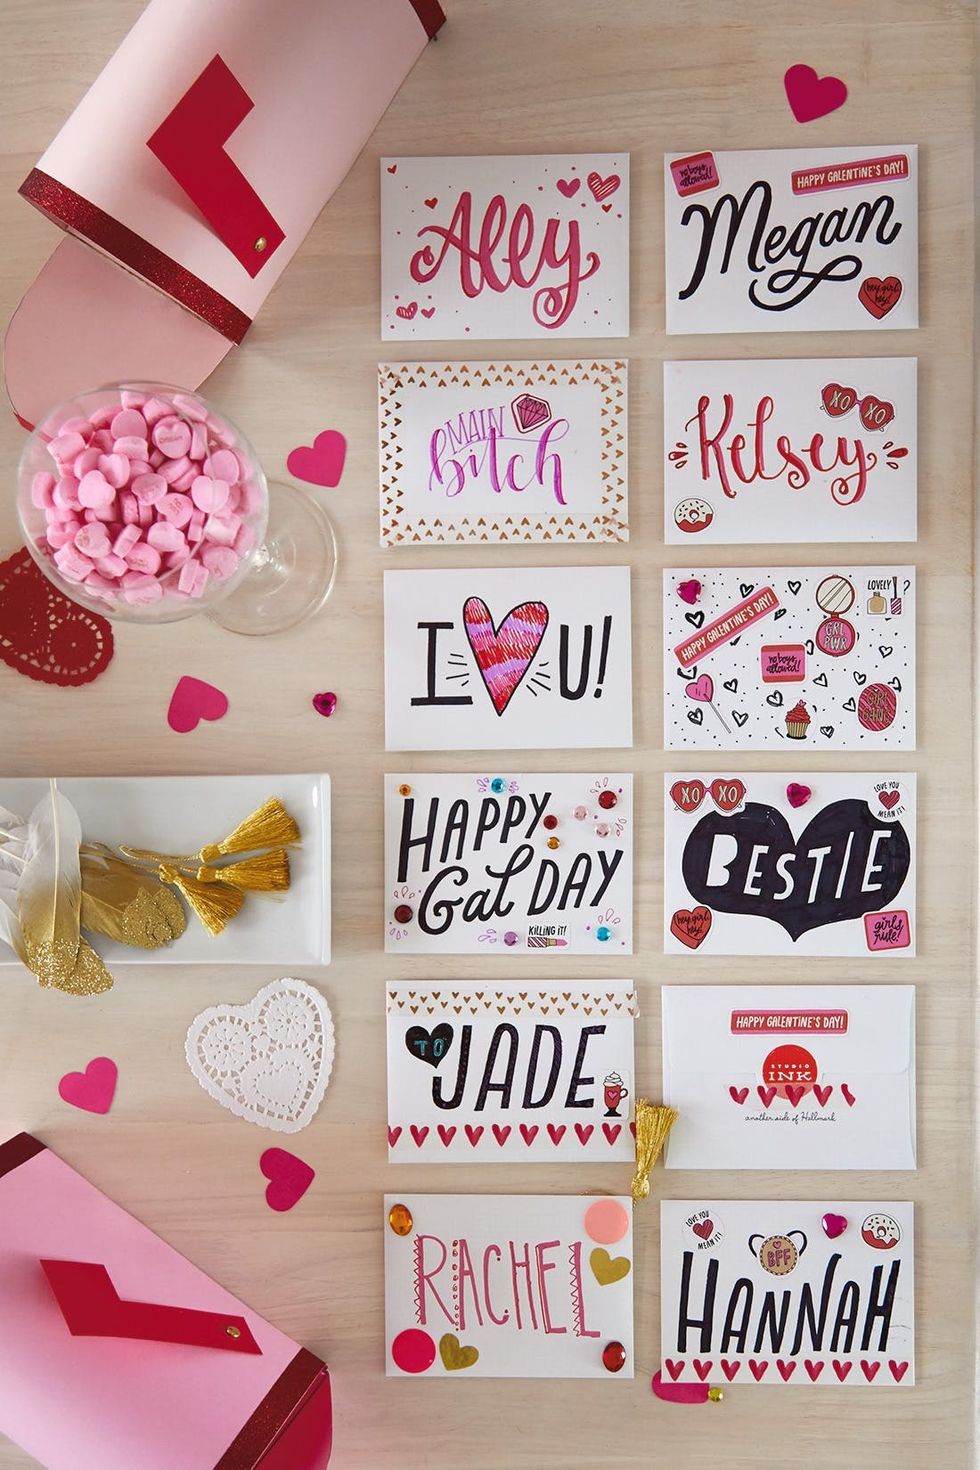 all the different galentine's cards